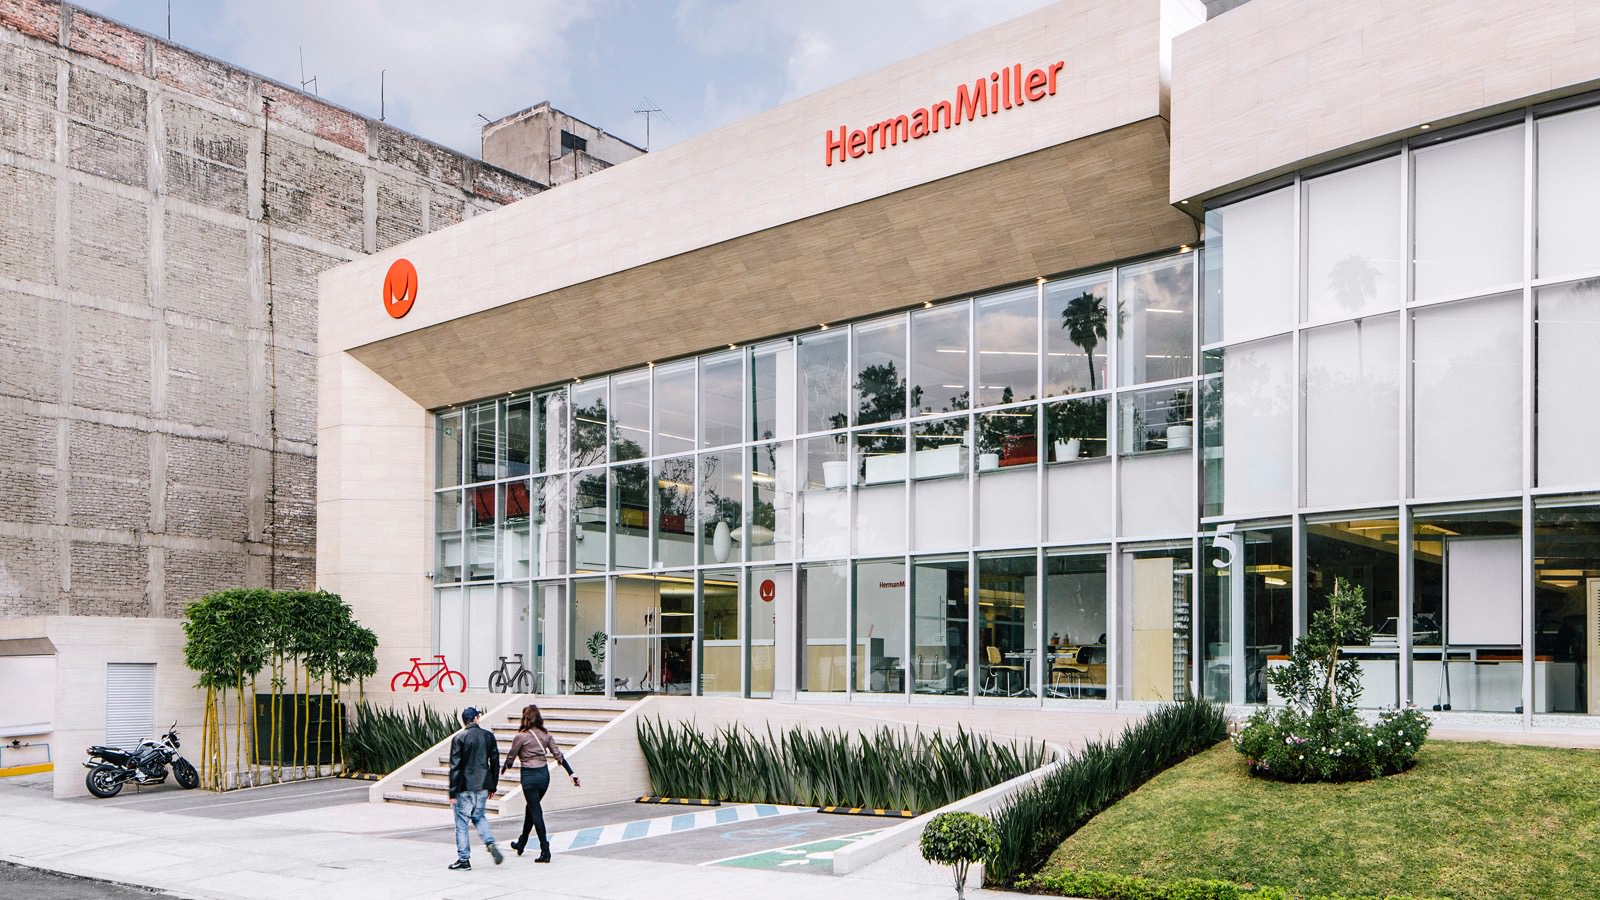 Two people approach the entrance of a Herman Miller showroom. Select to find Herman Miller showrooms around the world.